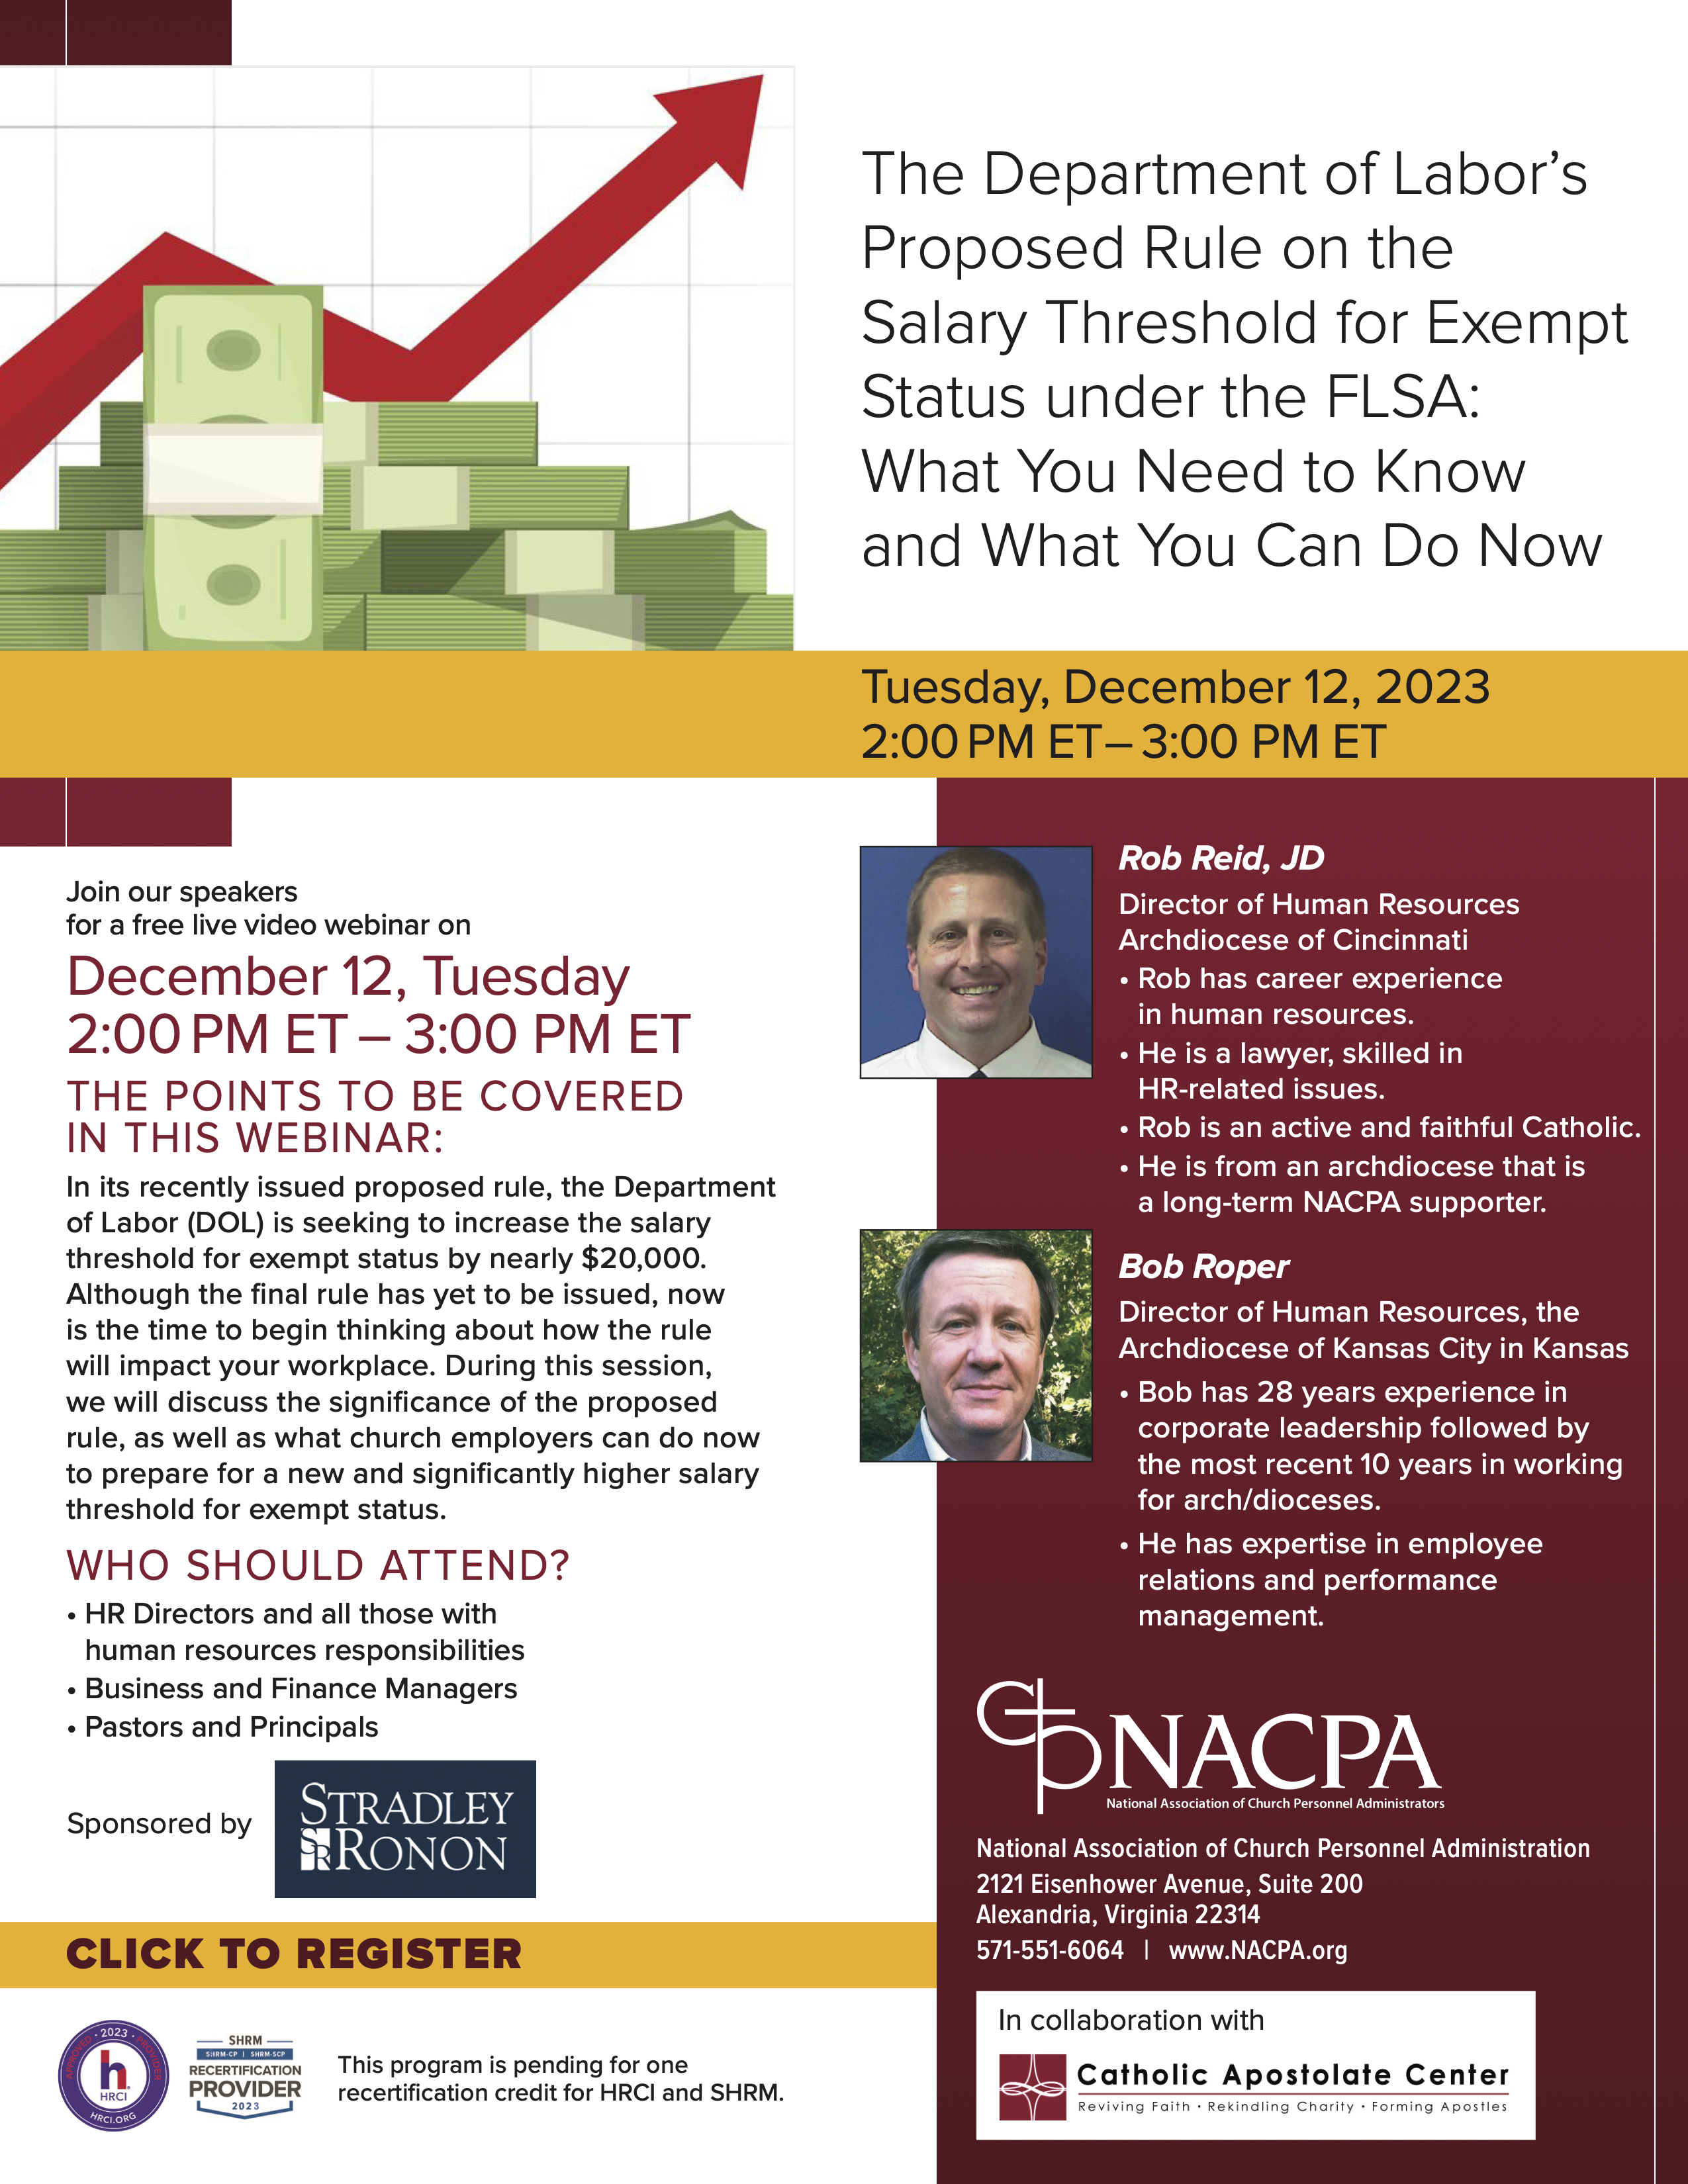 The Department of Labor’s  Proposed Rule on the  Salary Threshold for Exempt  Status under the FLSA:  What You Need to Know and What You Can Do Now 12/12/23 2PM ET